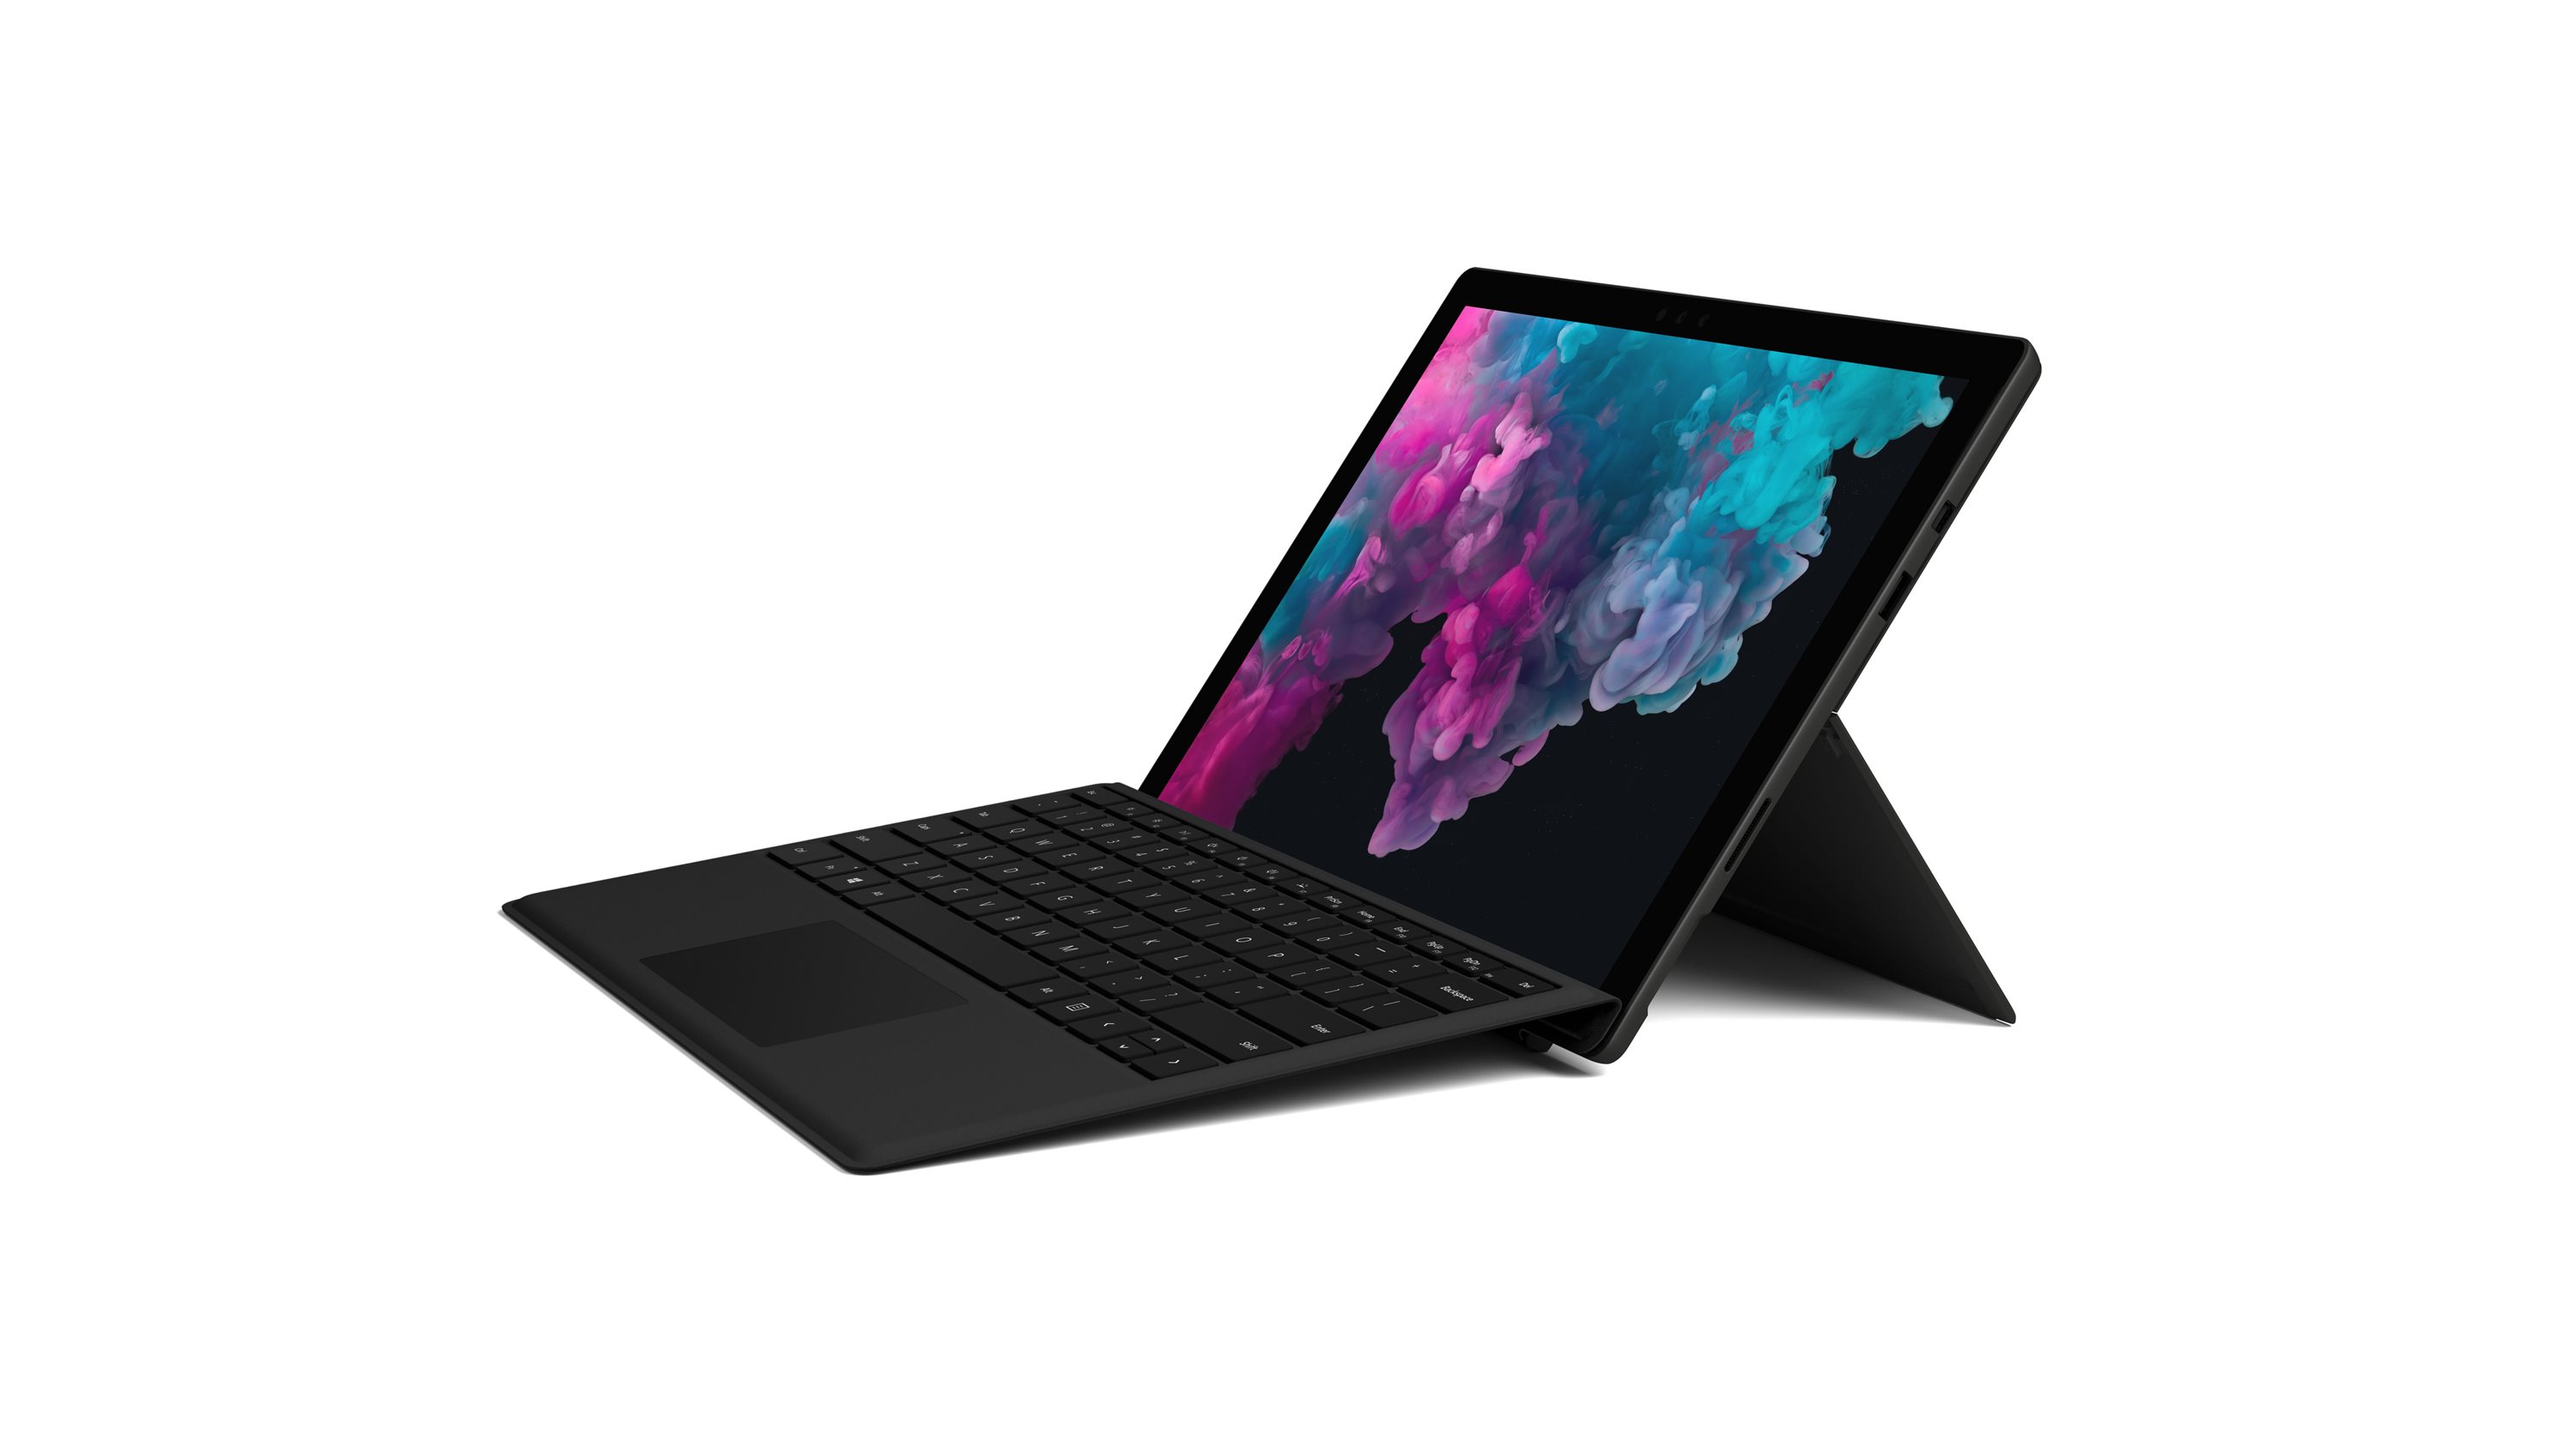 Microsoft Surface Pro 6 Tablet, 12.3